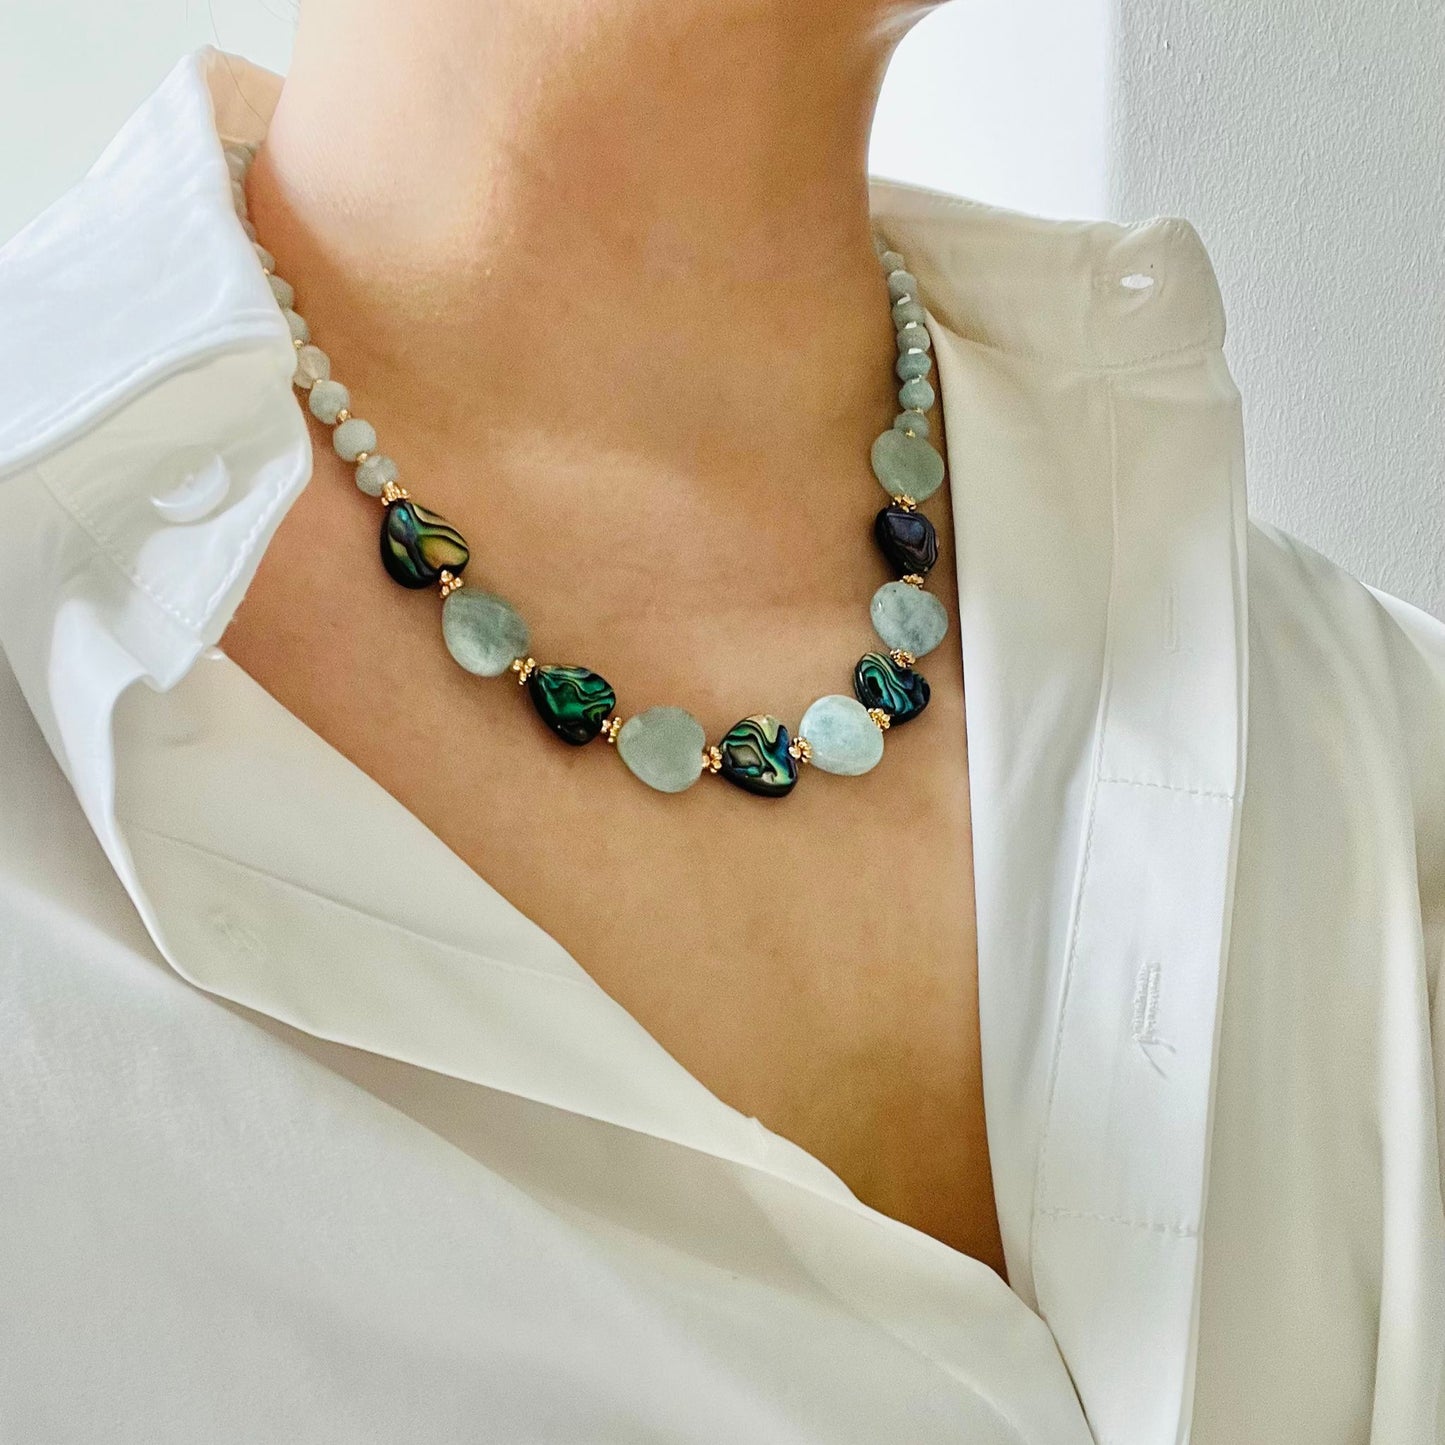 Aquamarine & Abalone Mother Of Pearl Necklace